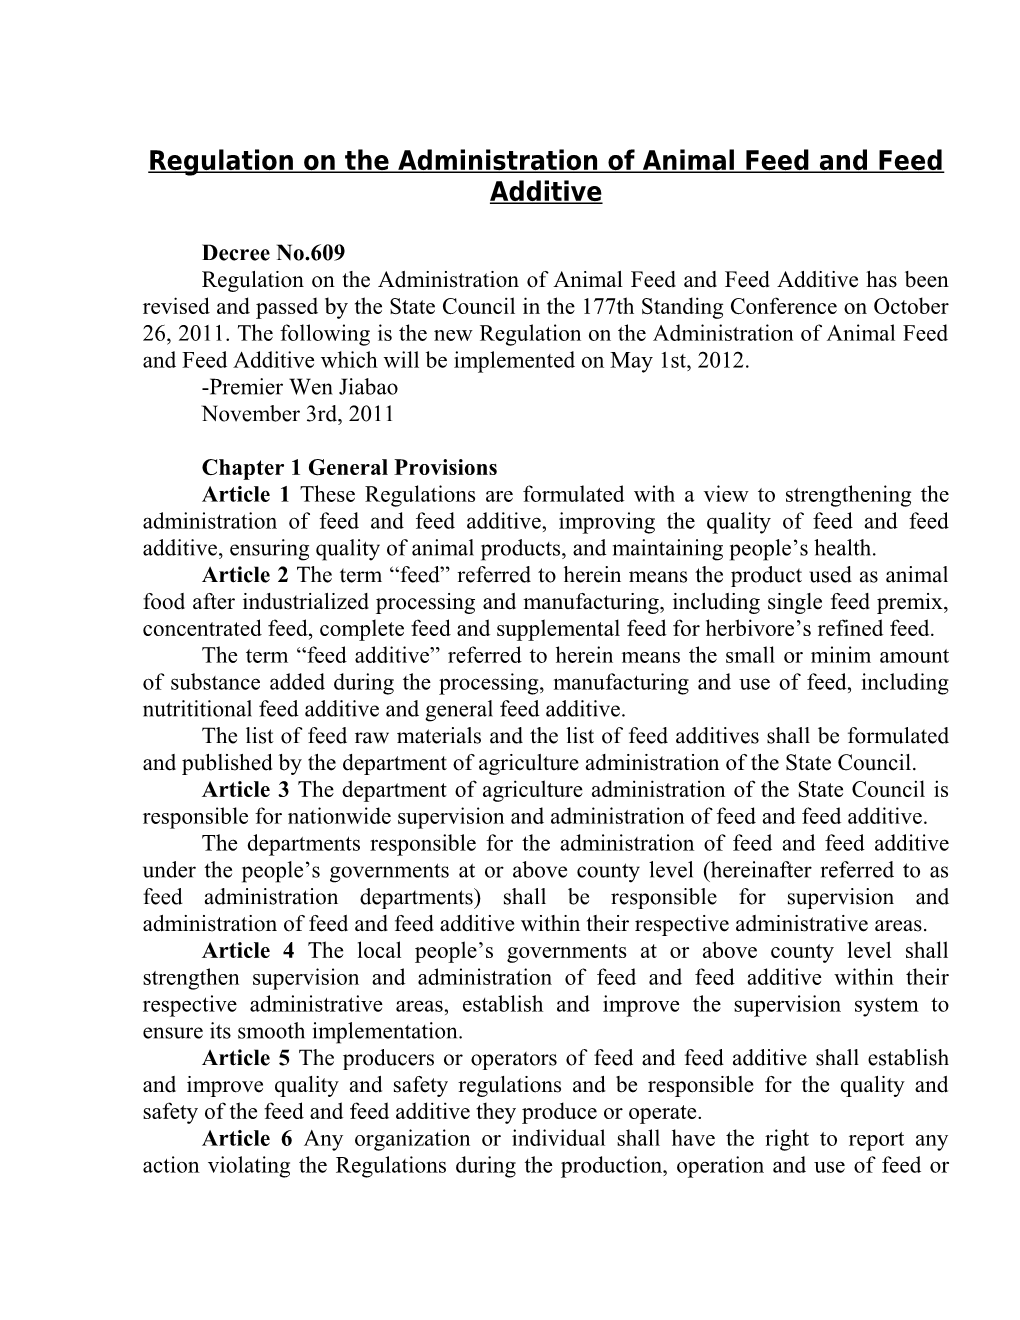 Regulation on the Administration of Animal Feed and Feed Additive